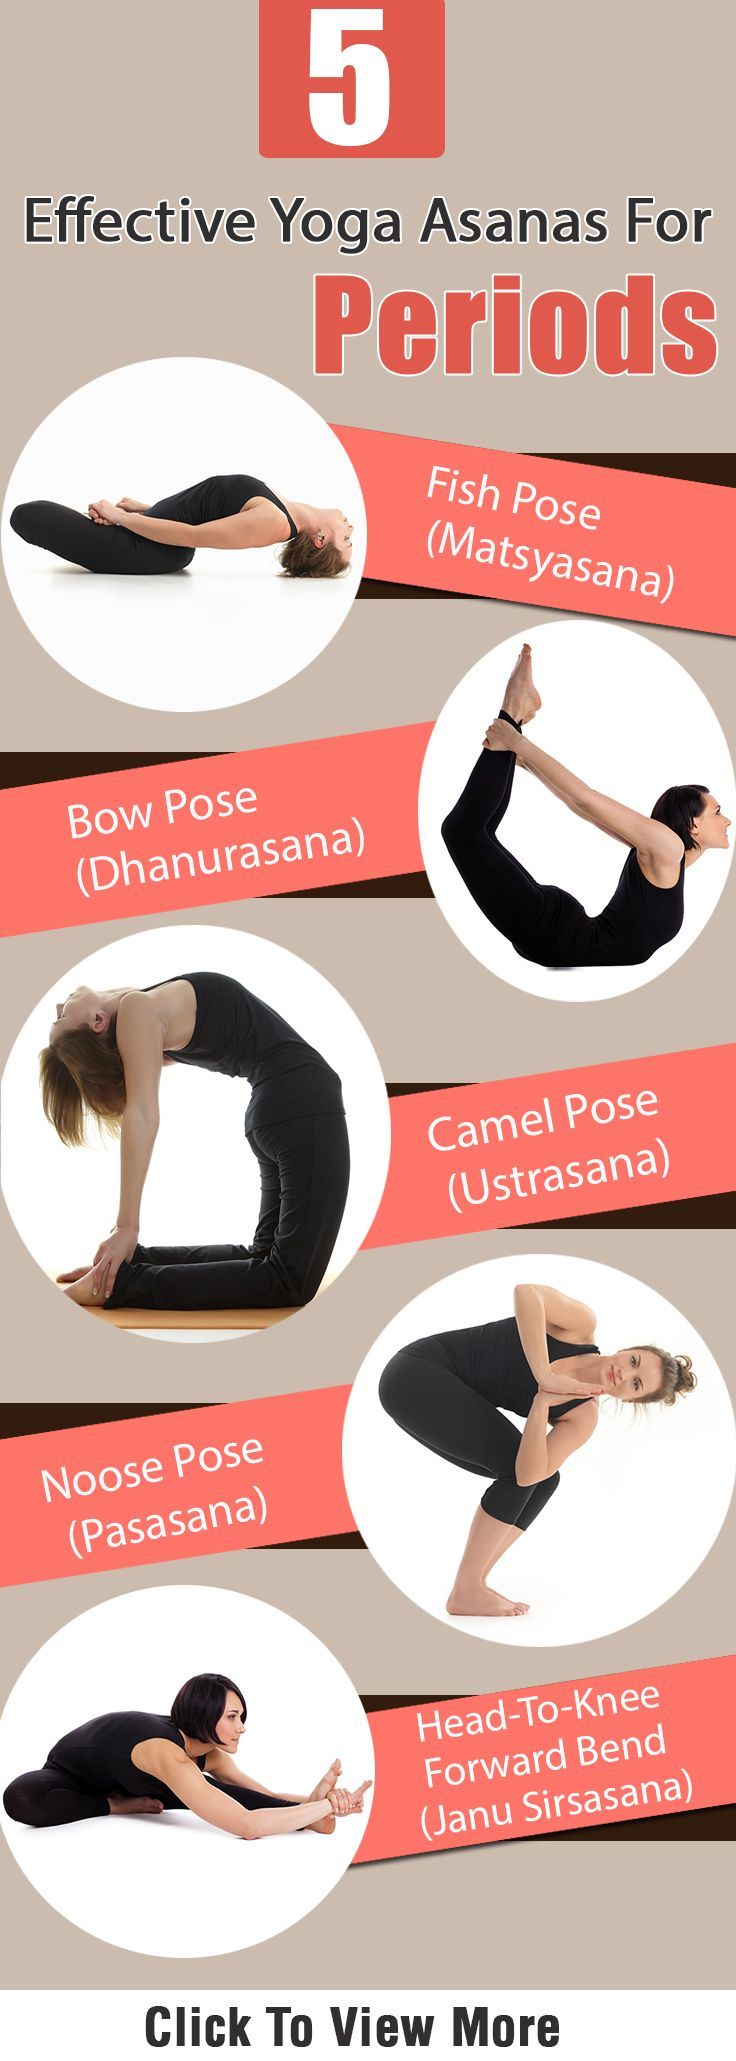 5 Effective Yoga Asanas For Periods : Let us take a look at how the age-old yoga asanas can help us with our